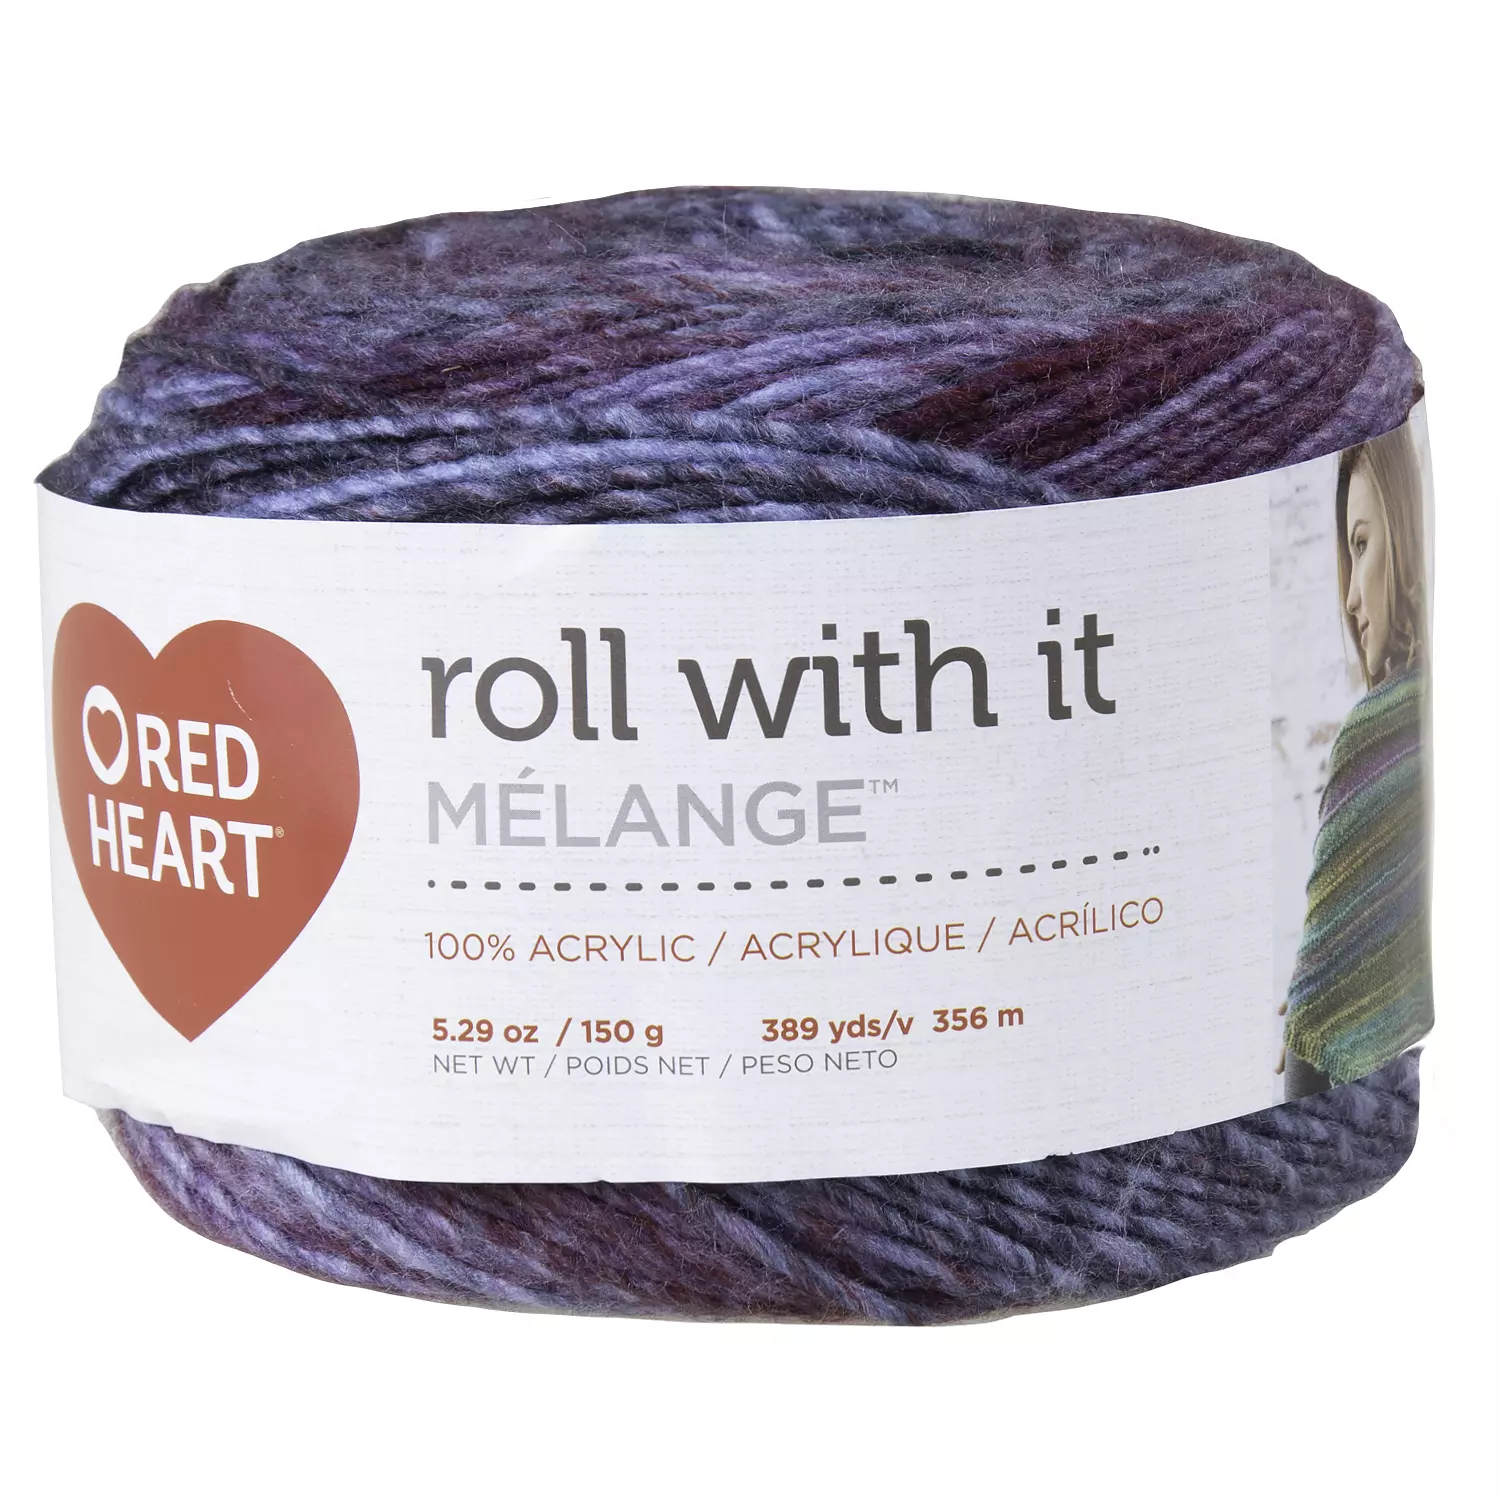 Red Heart Roll With It Mélange - Yarn, autograph. Colour: multi-color